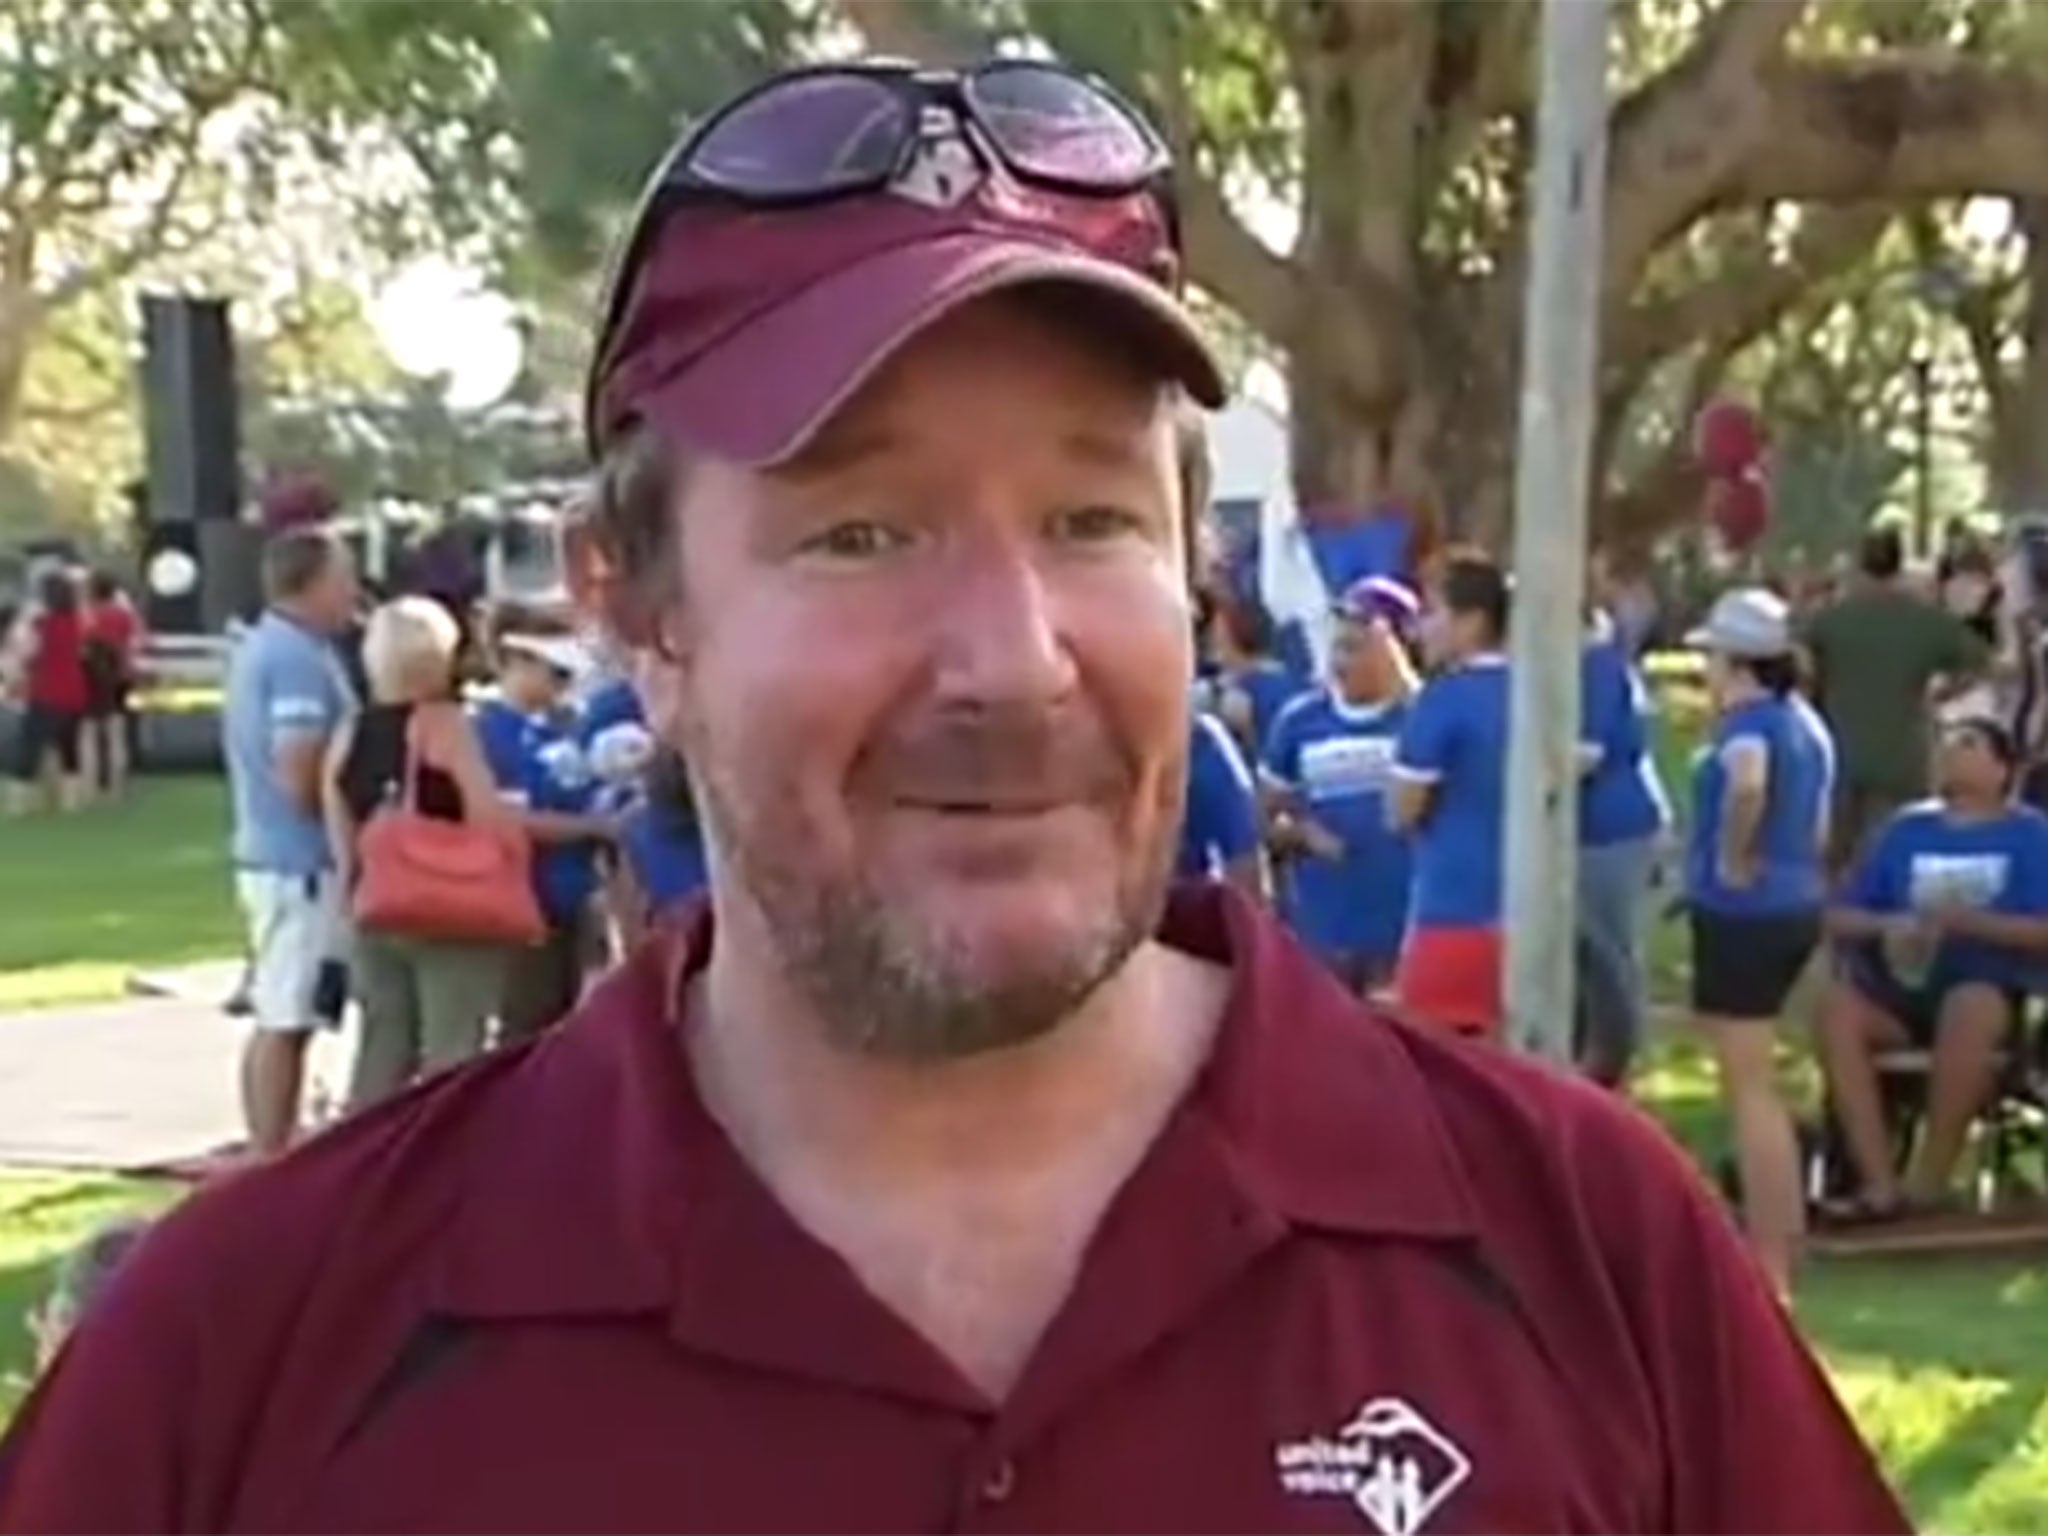 Screengrab from an ABC News report shows Matthew Gardiner speaking at a Labor event